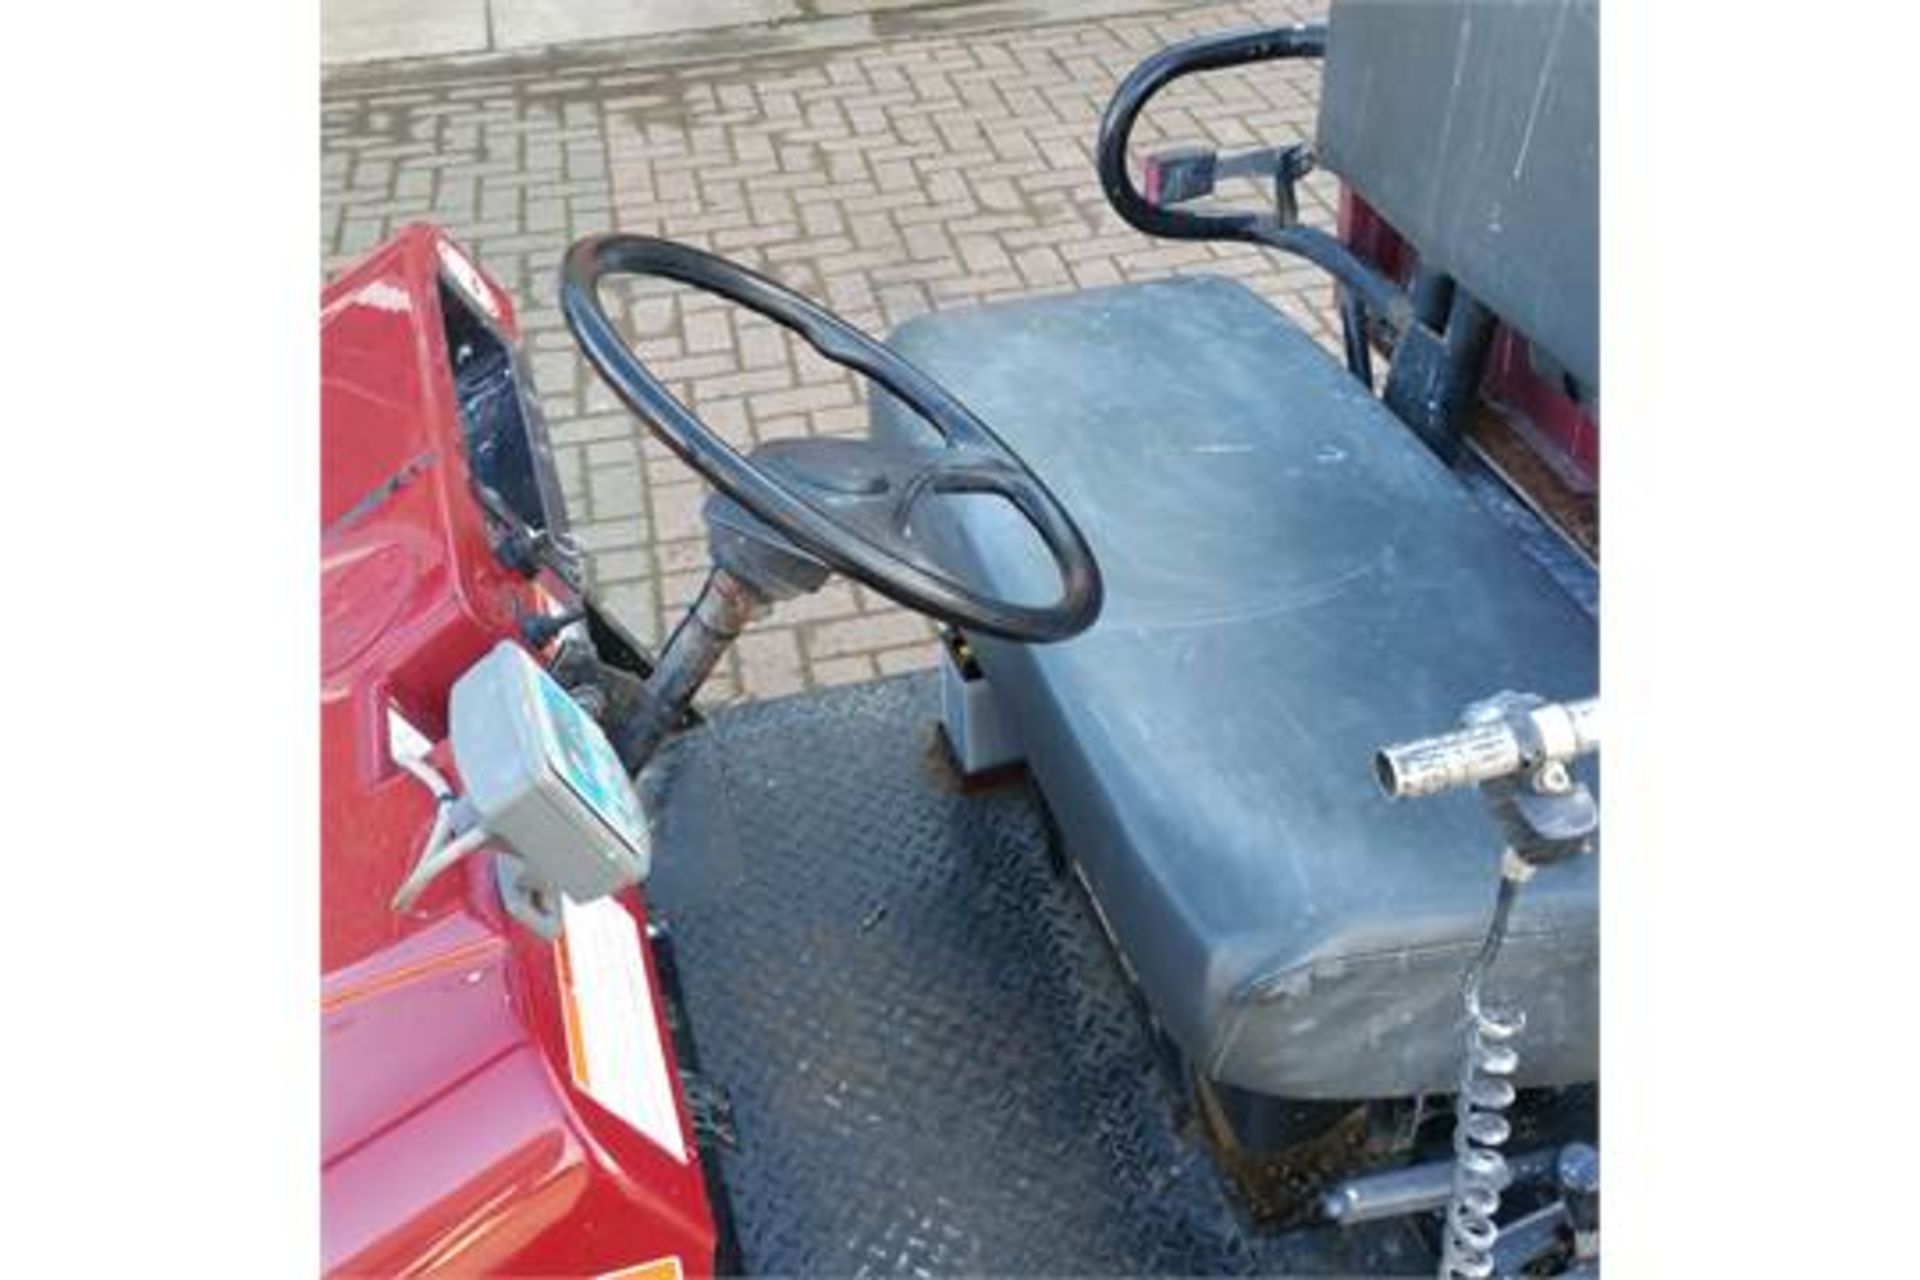 Kawasaki Mule 550 Petrol single cylinder Hours 586 from new Only used for line marking White line - Bild 6 aus 6